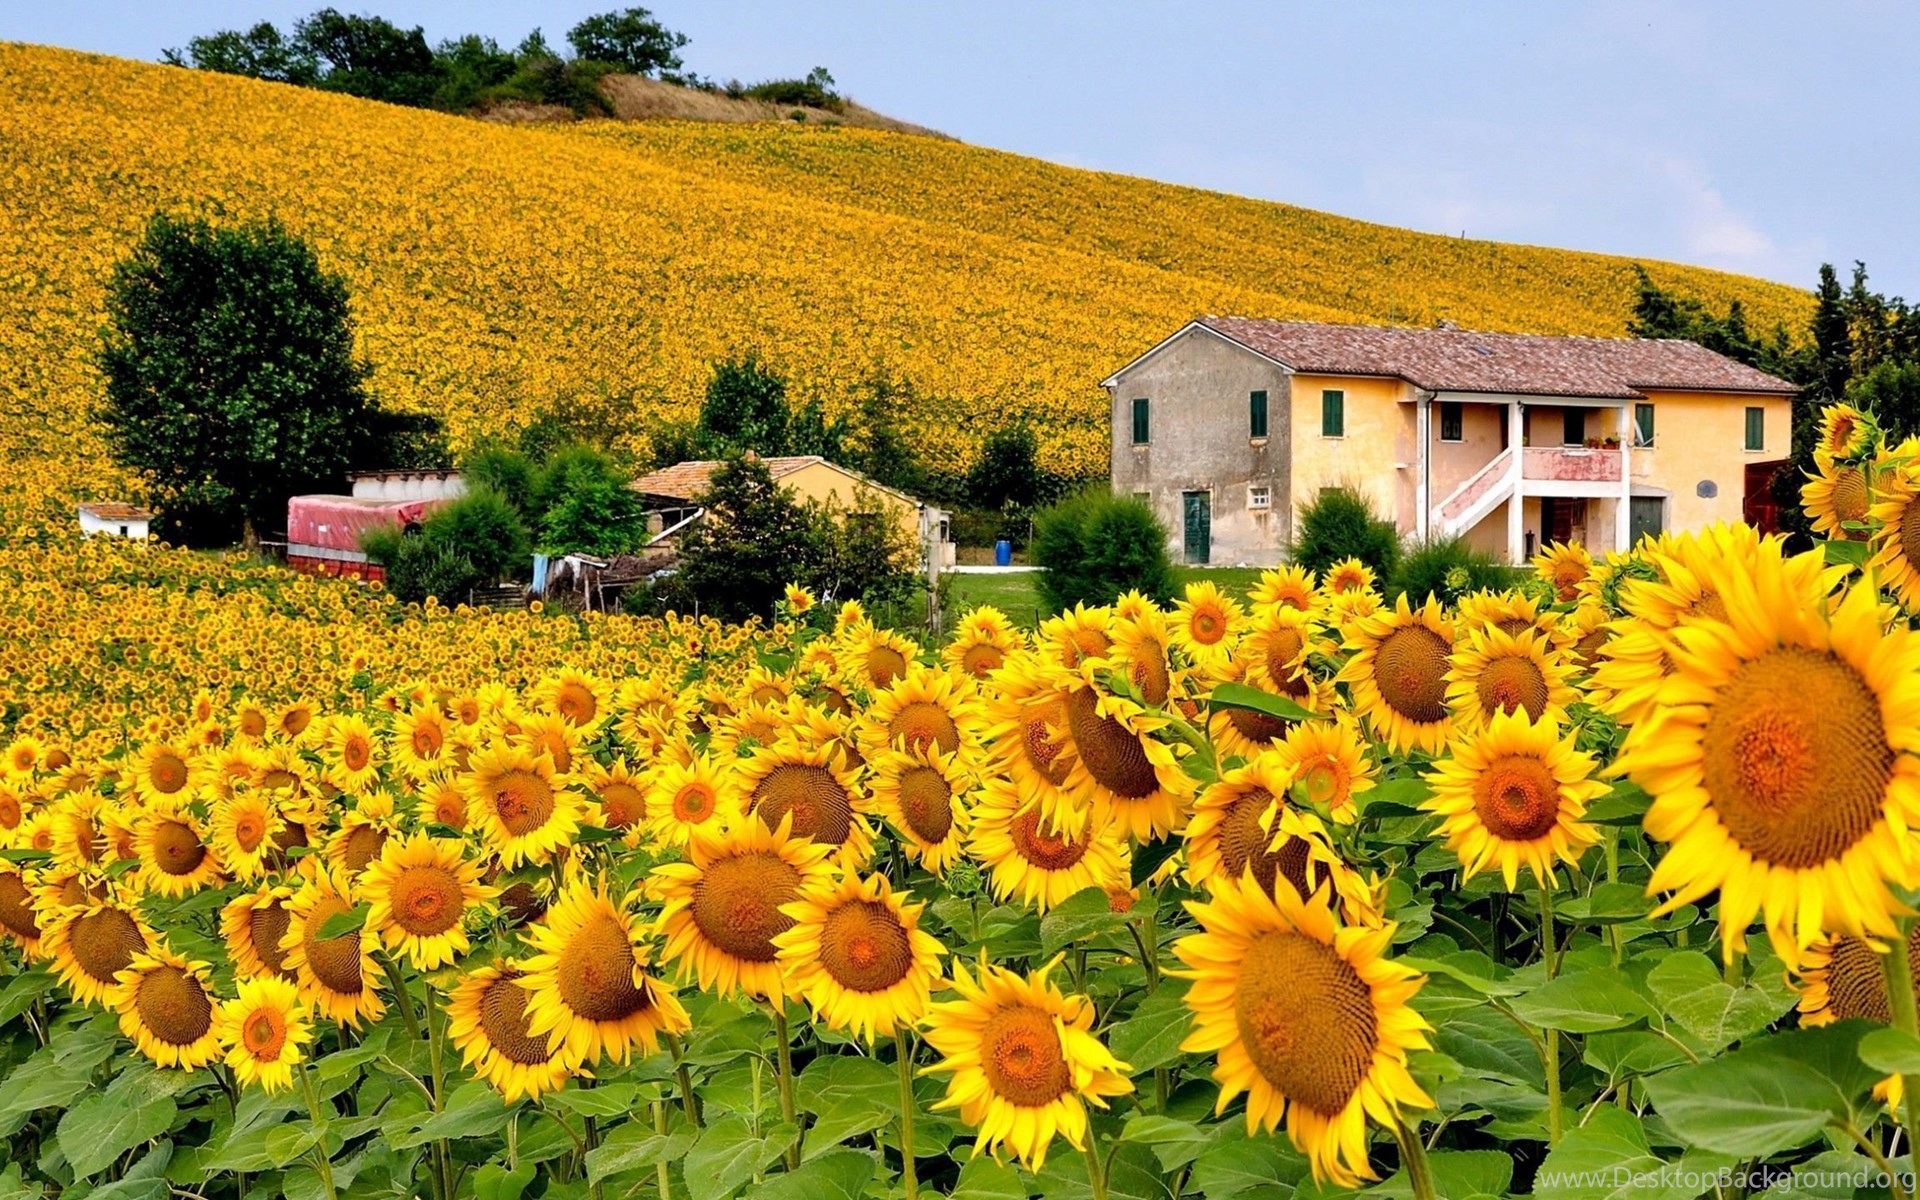 197428-italy-sunflowers-field-wallpapers-world-wallpapers-2560x1440-h.jpg